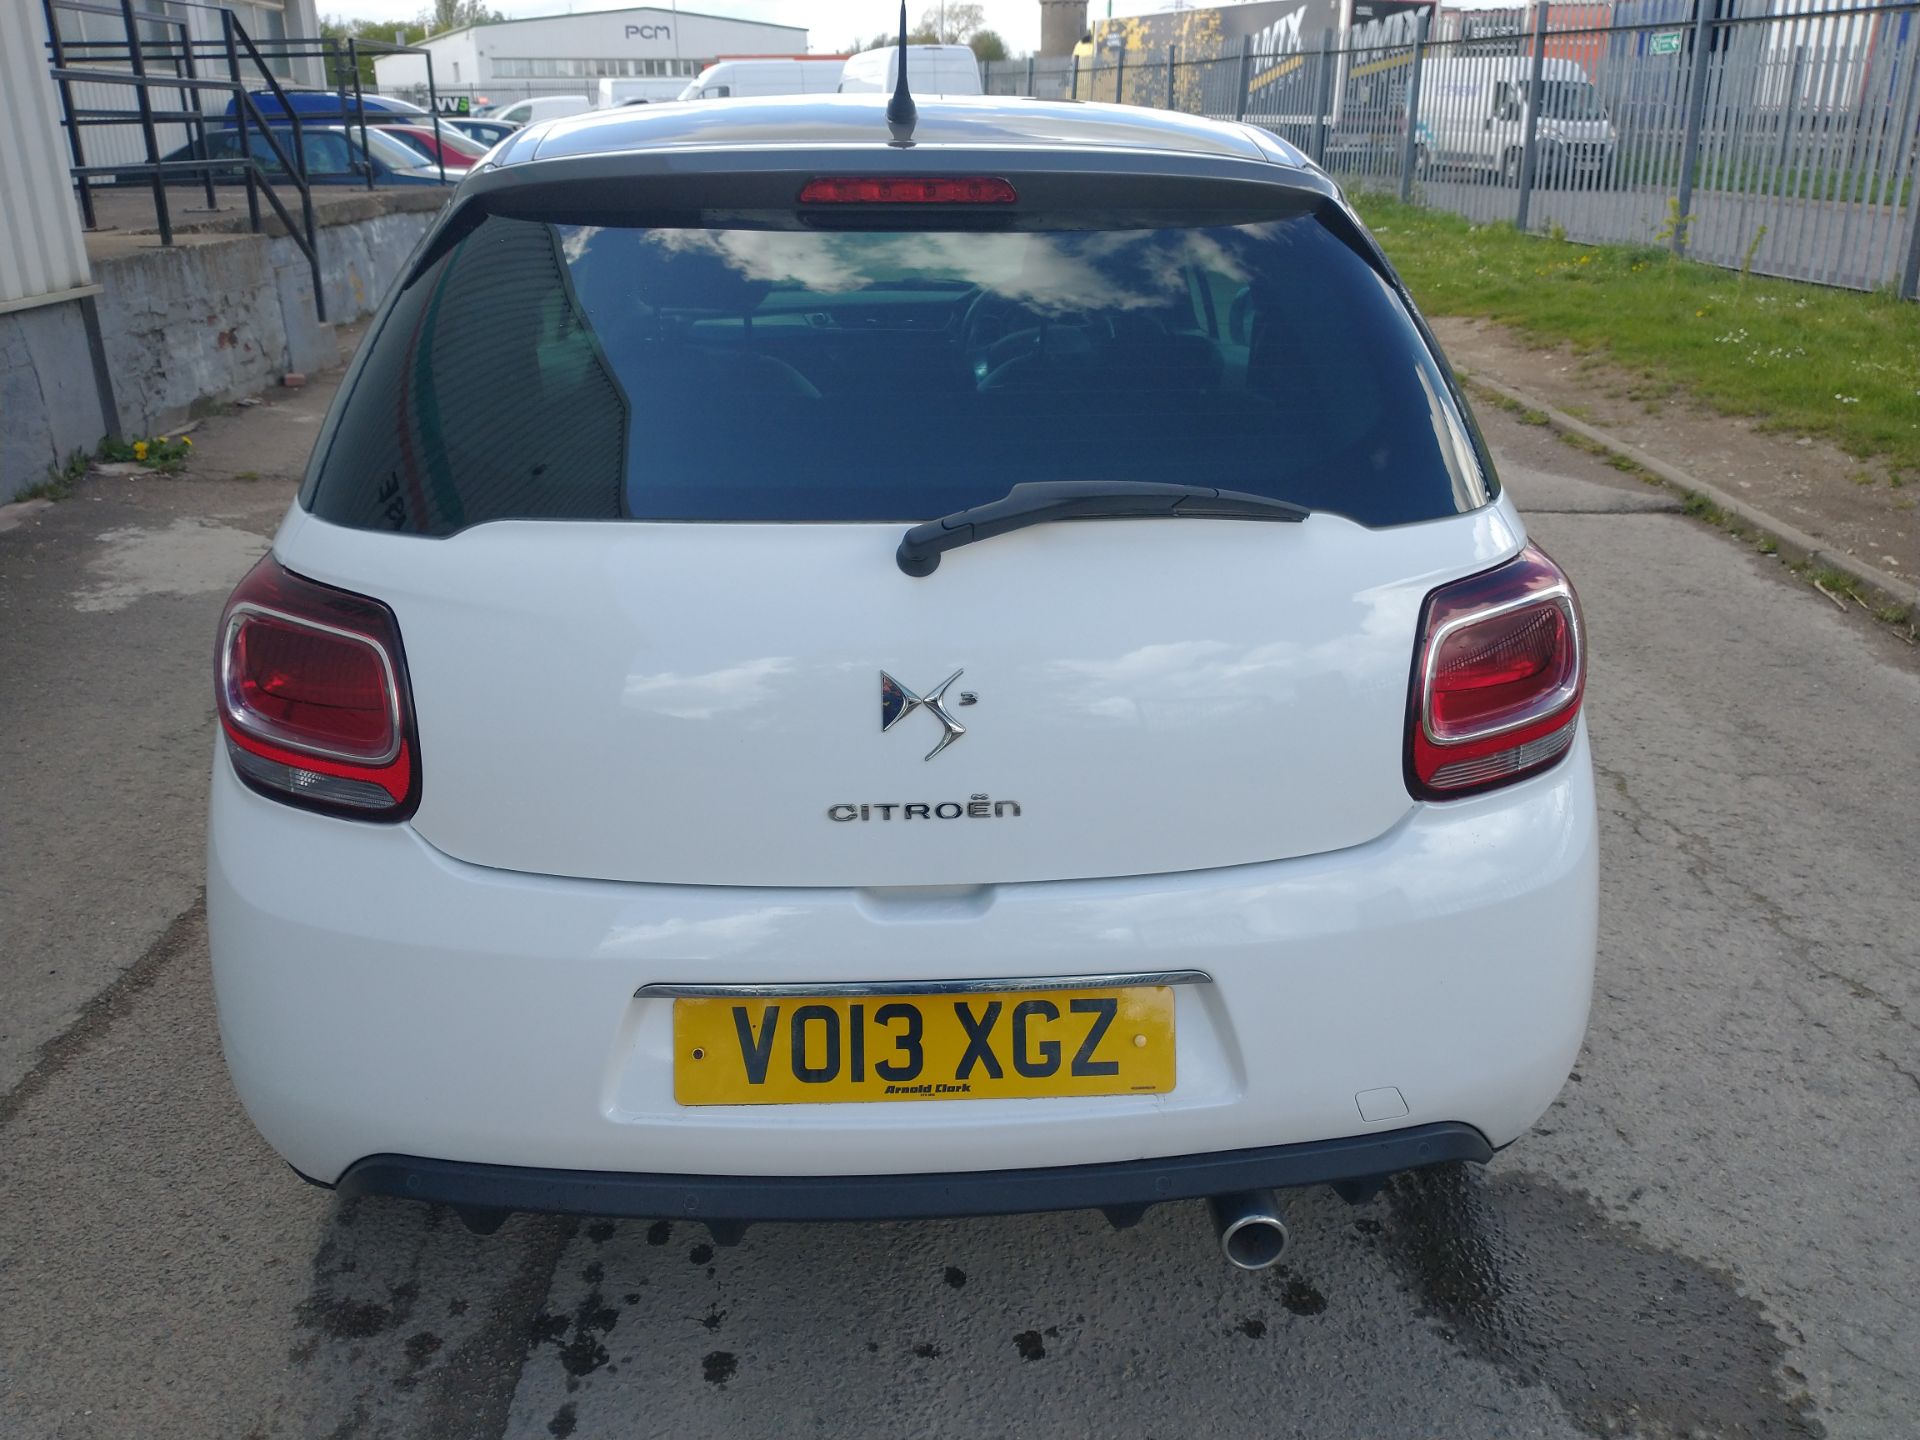 2013 Citroen DS3 Dstyle + E- HDI - CL505 - NO VAT ON THE HAMMER - Location: Corby - Image 2 of 17